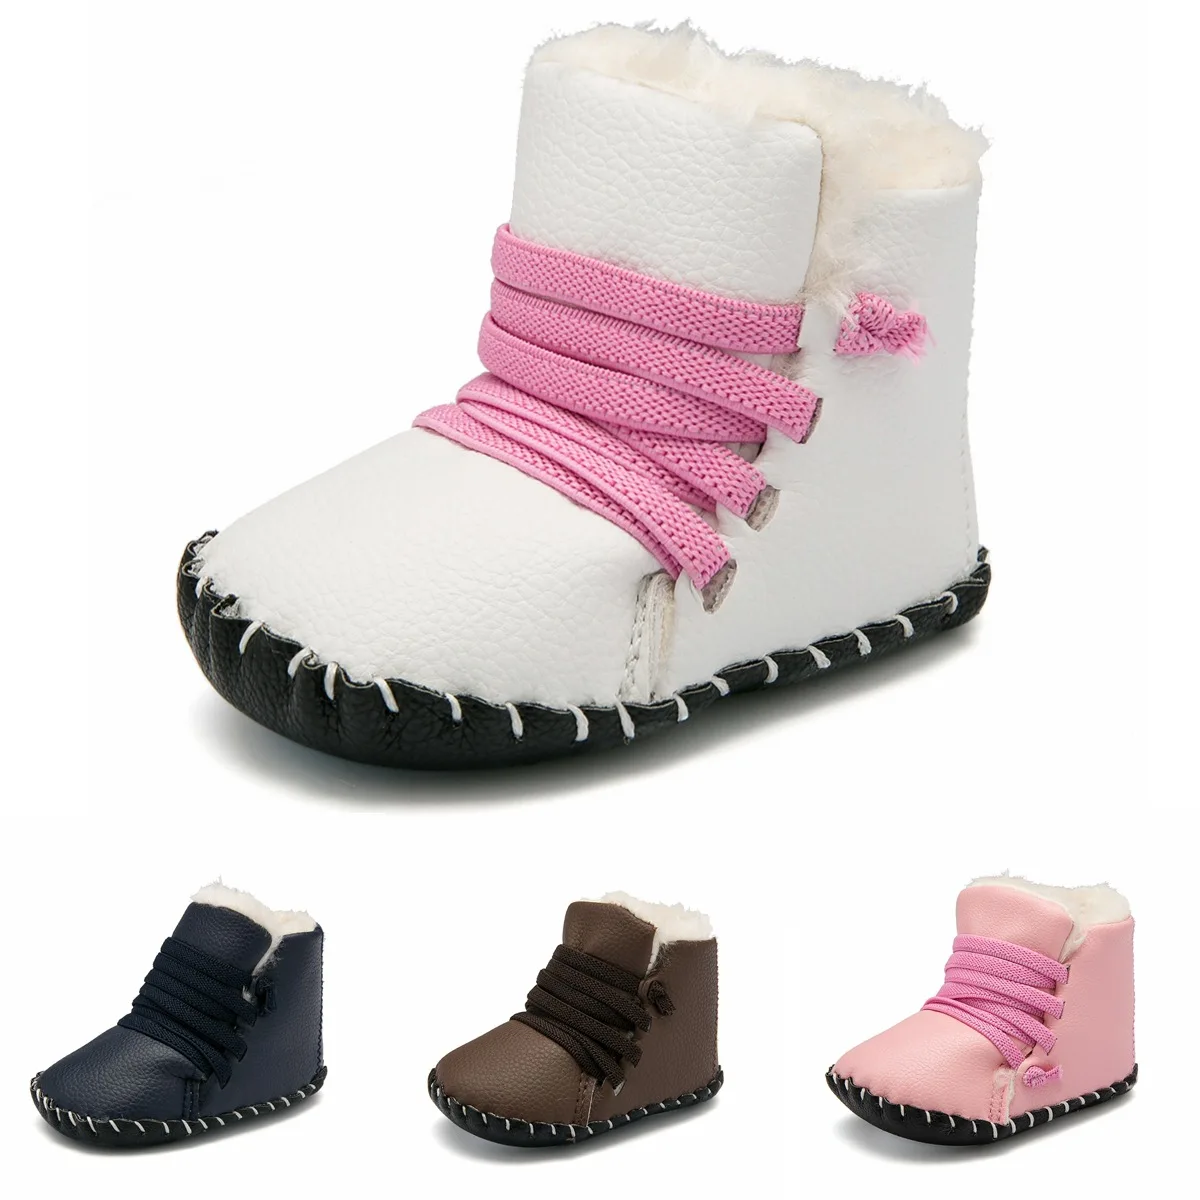 Unisex Baby Shoes For Boy And Girls Newborn Bootie Winter Warm Infant Toddler Crib Shoes Classic Floor First Walkers